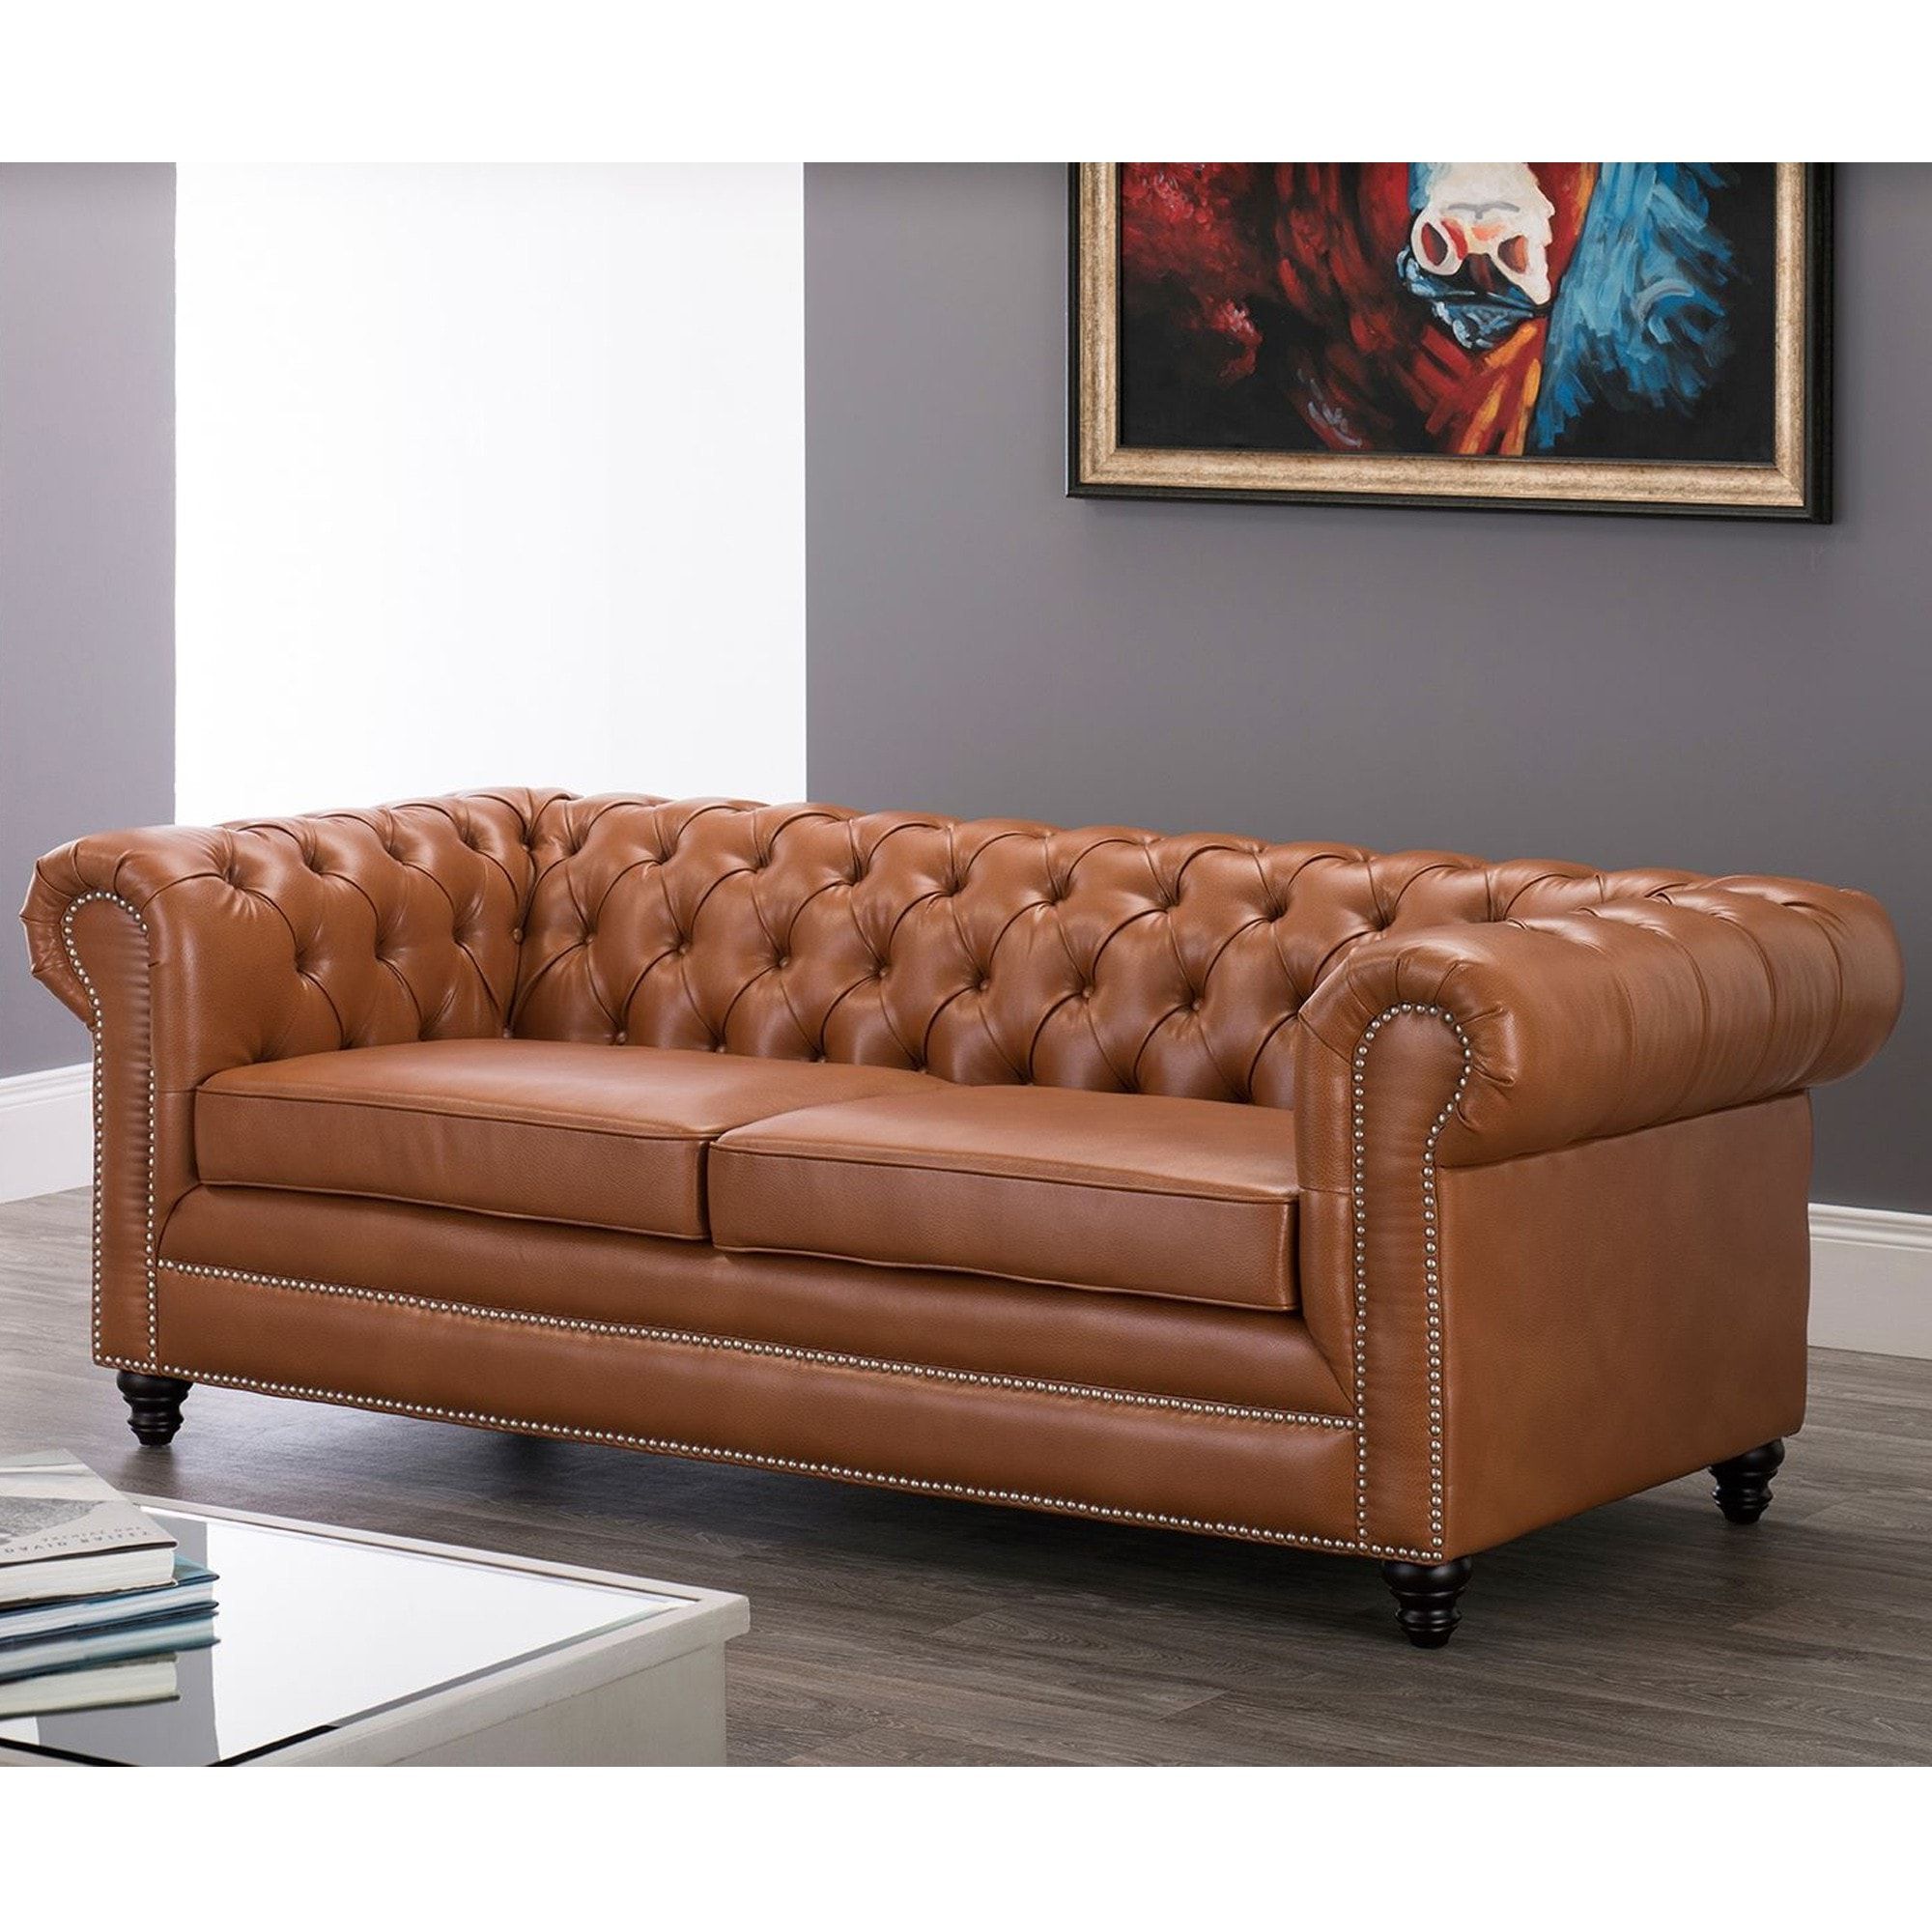 Tobacco Brown Leather Chesterfield Sofa (View 13 of 15)